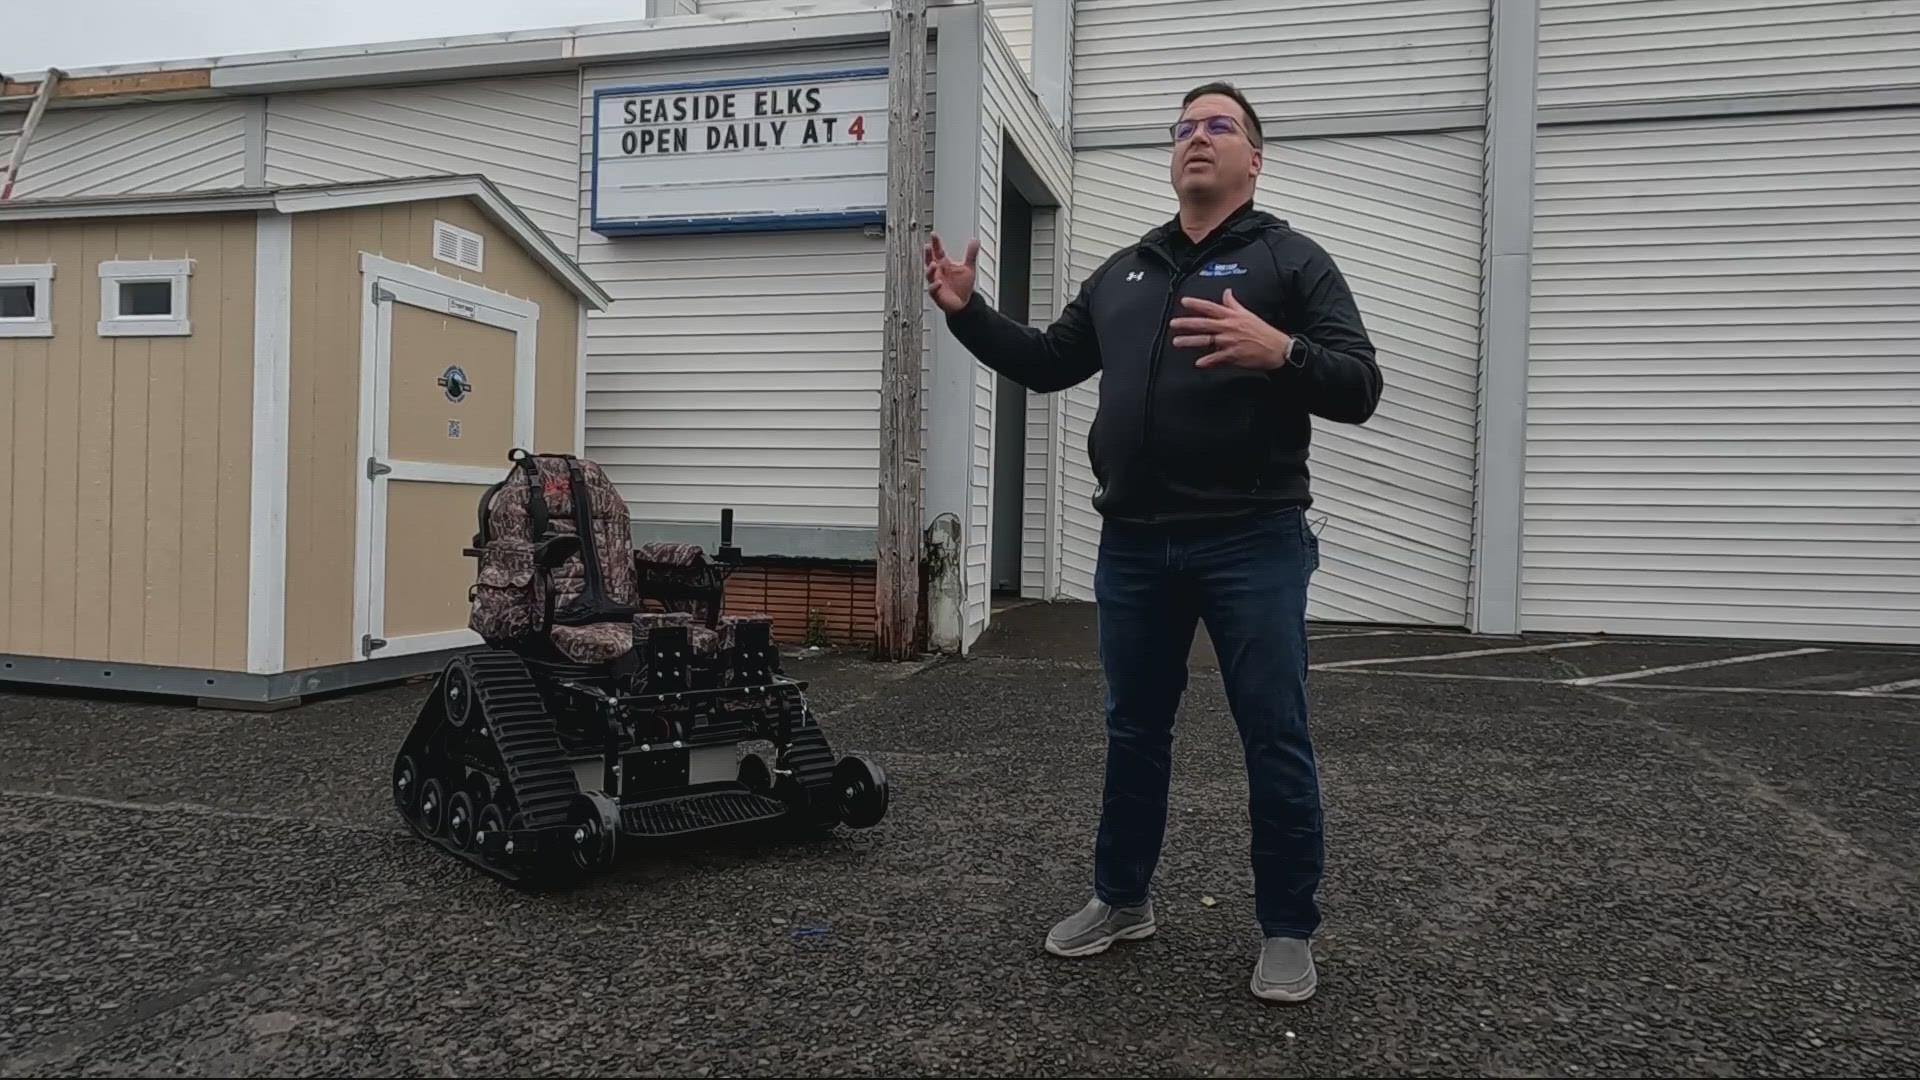 David's Chair and Oregon Parks Forever teamed up with organizations in the city to bring an electric all-terrain track chair to Seaside Beach Oregon.